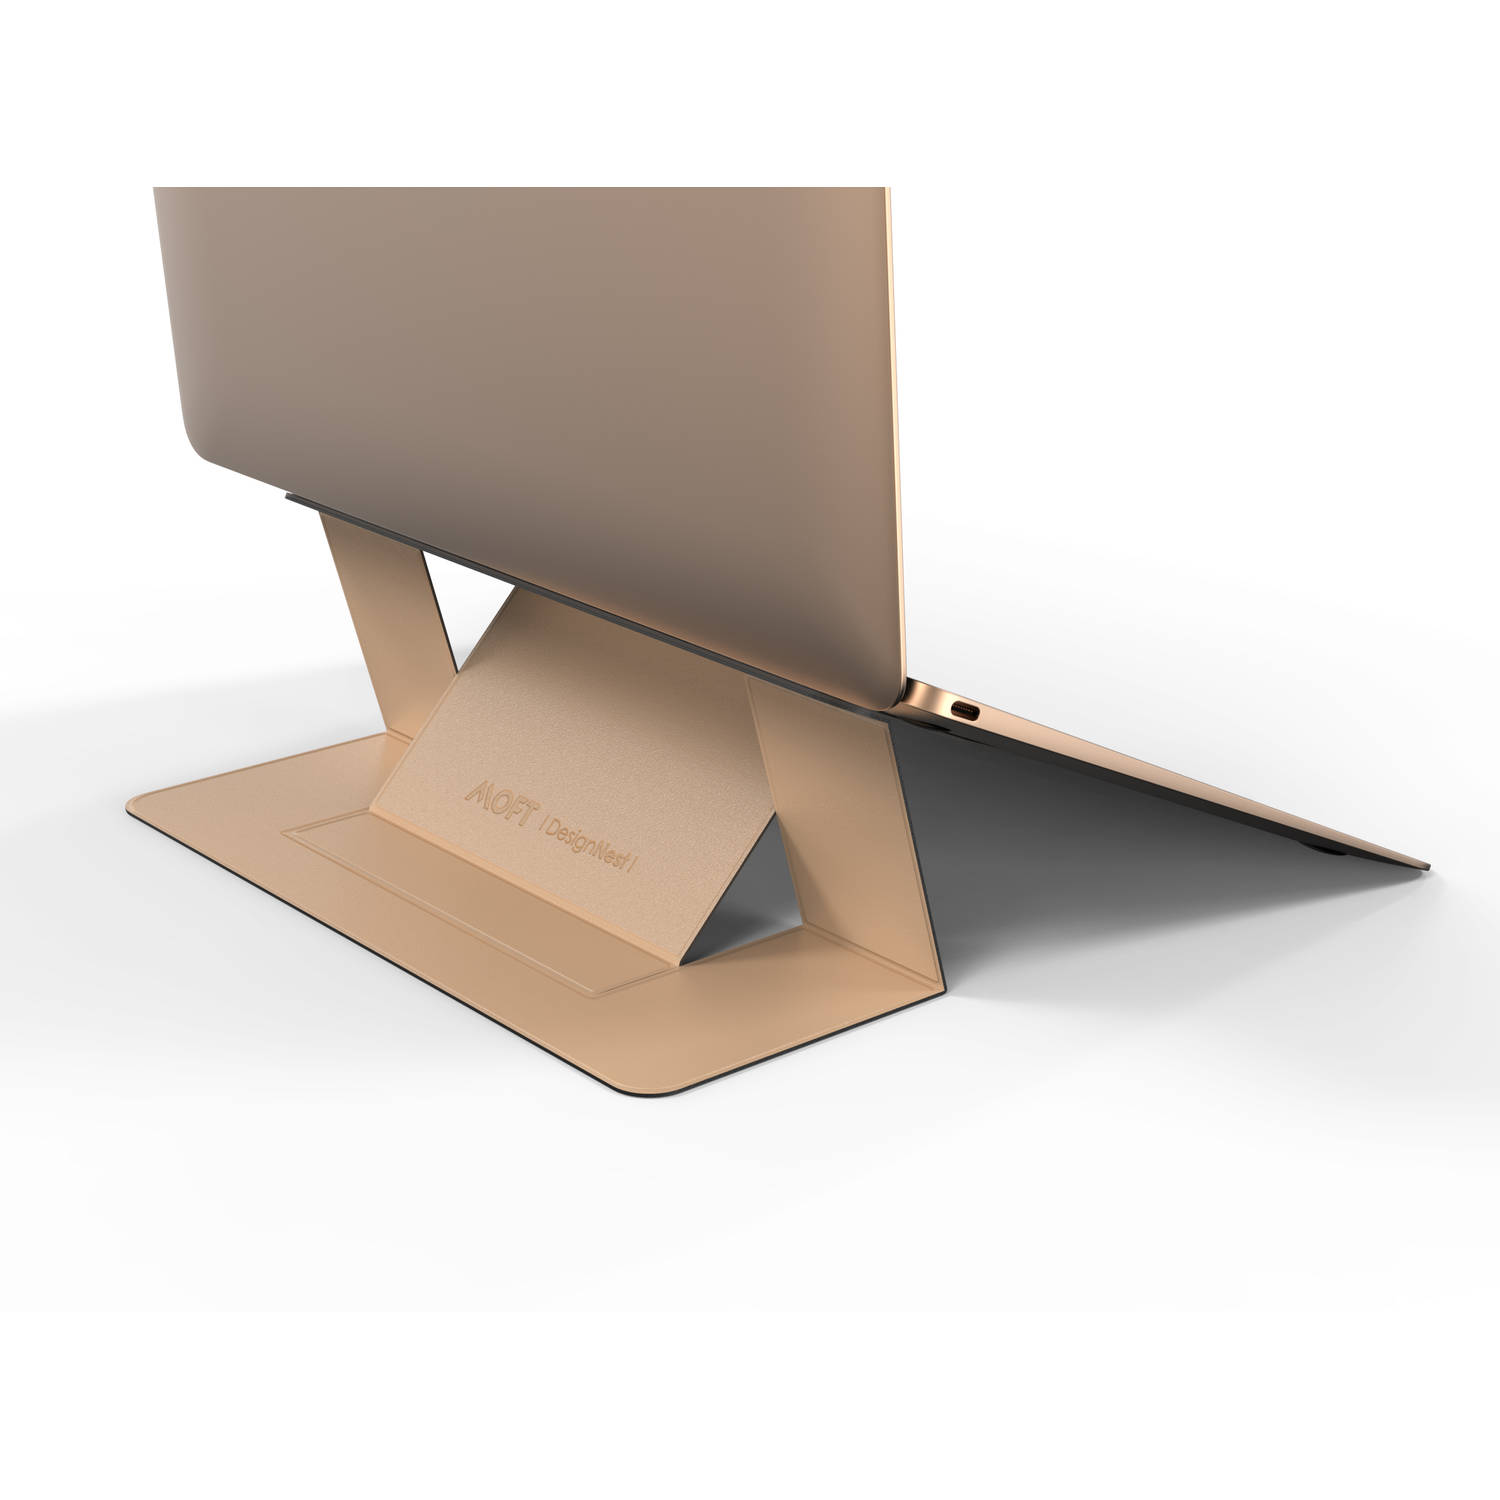 Allocacoc Moft Laptop Stand